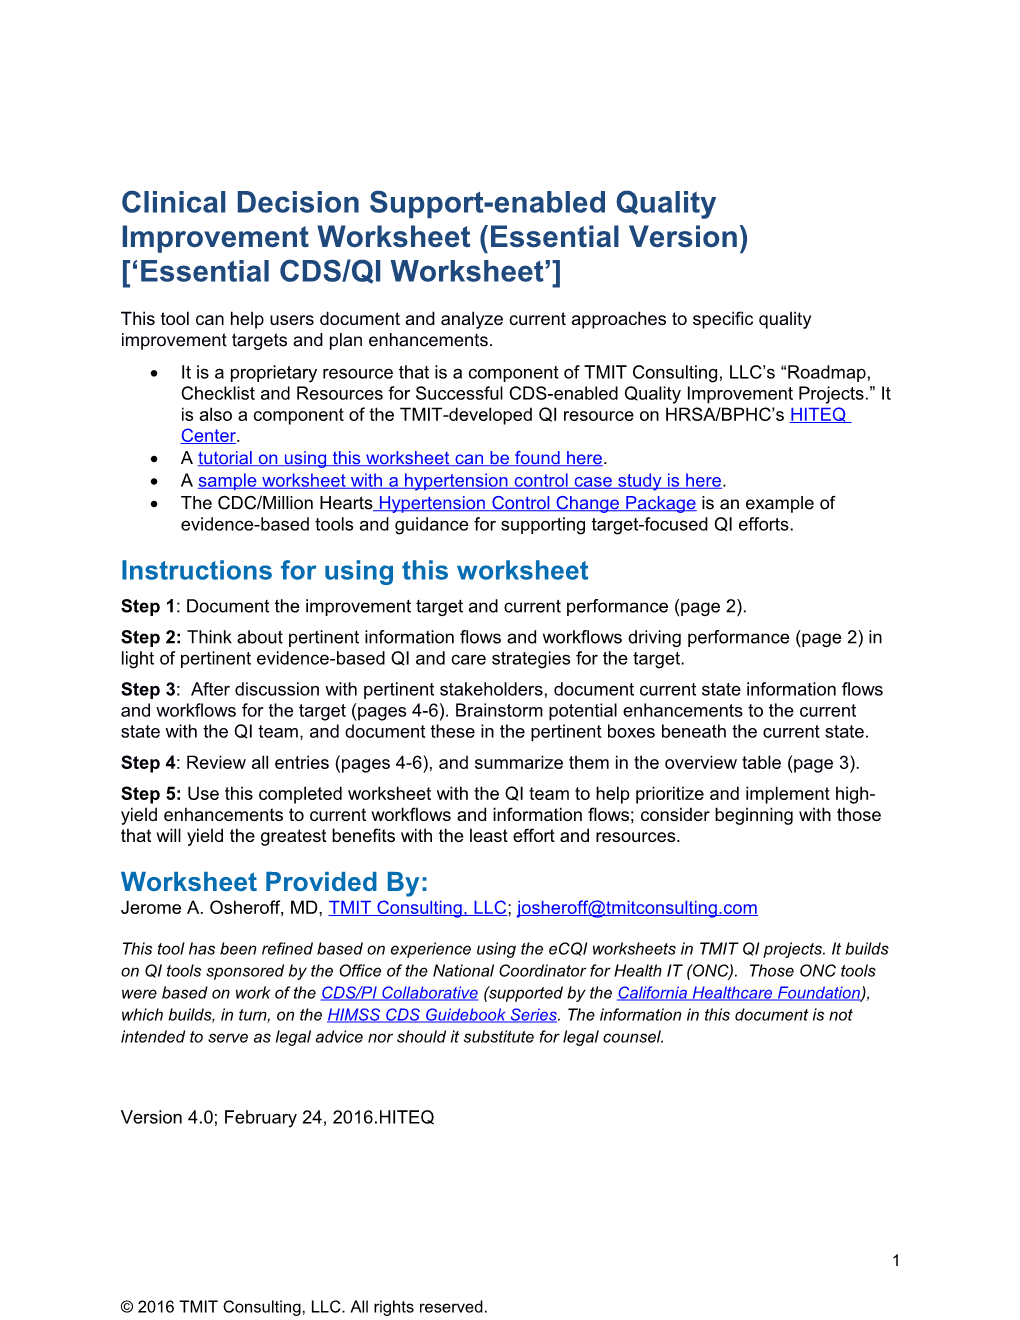 Clinical Decision Support-Enabled Quality Improvement Worksheet (Essential Version) Essential